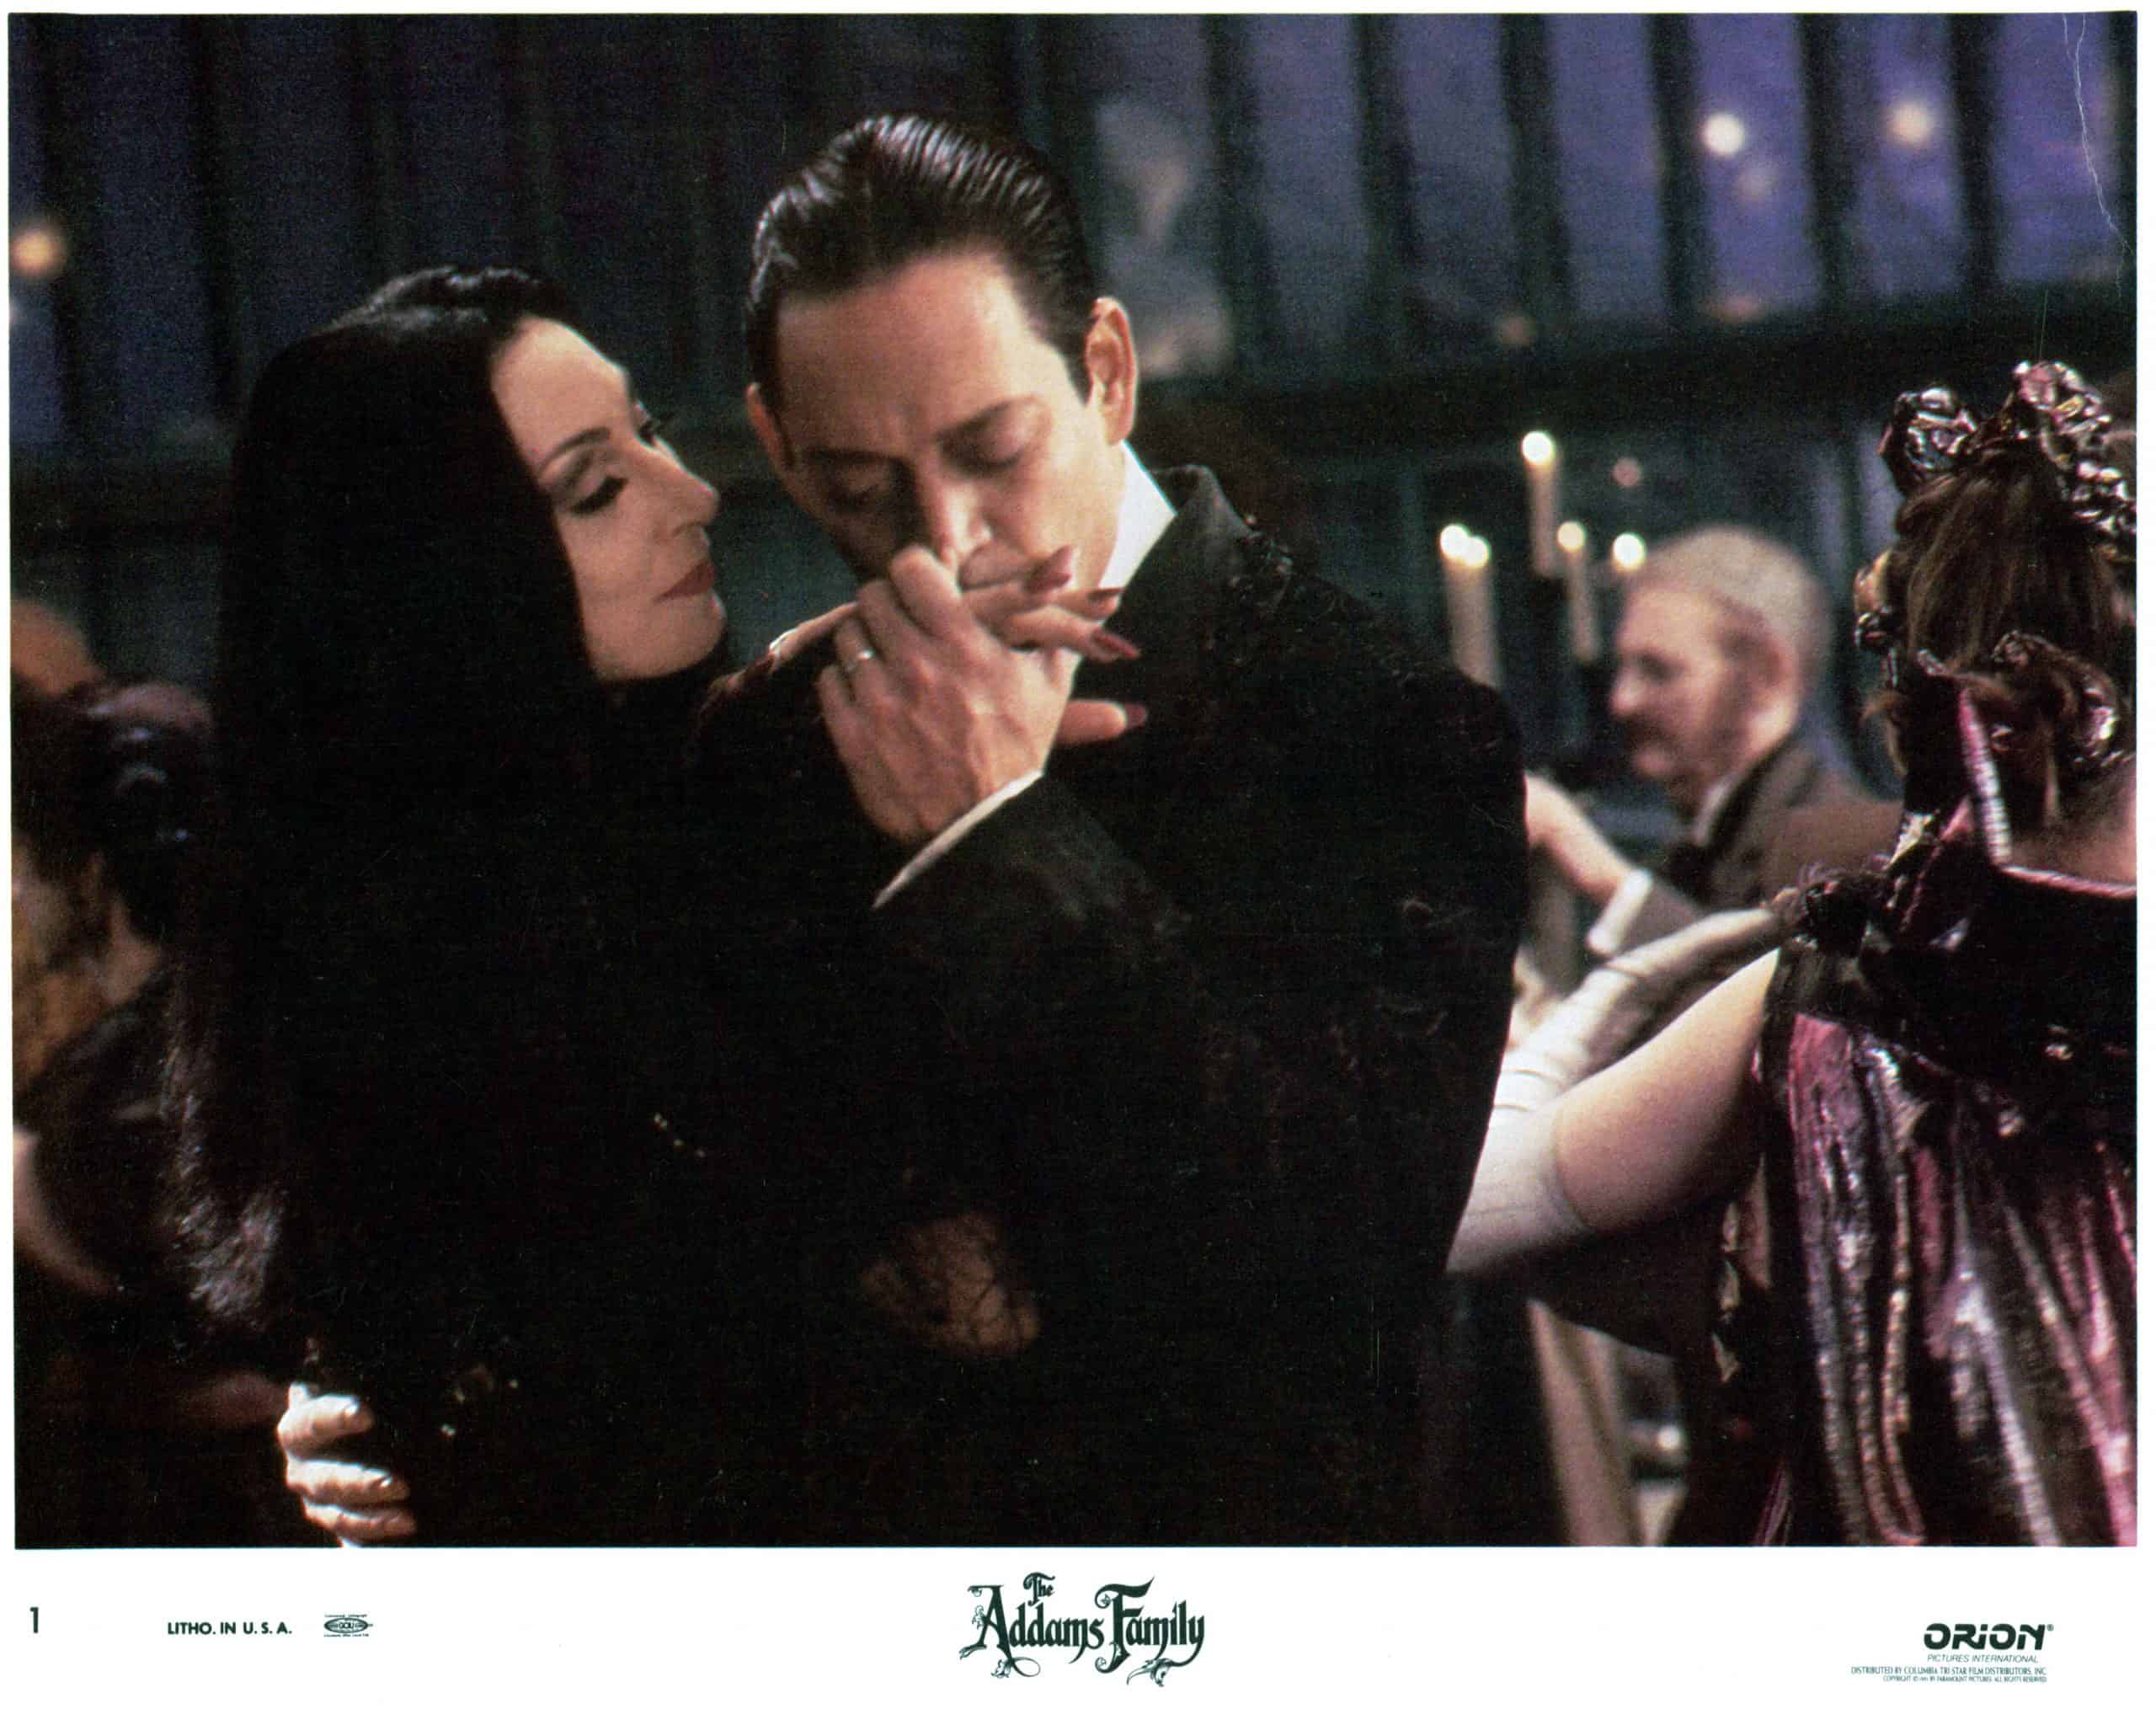 Gomez kisses Morticia's hand as they dance